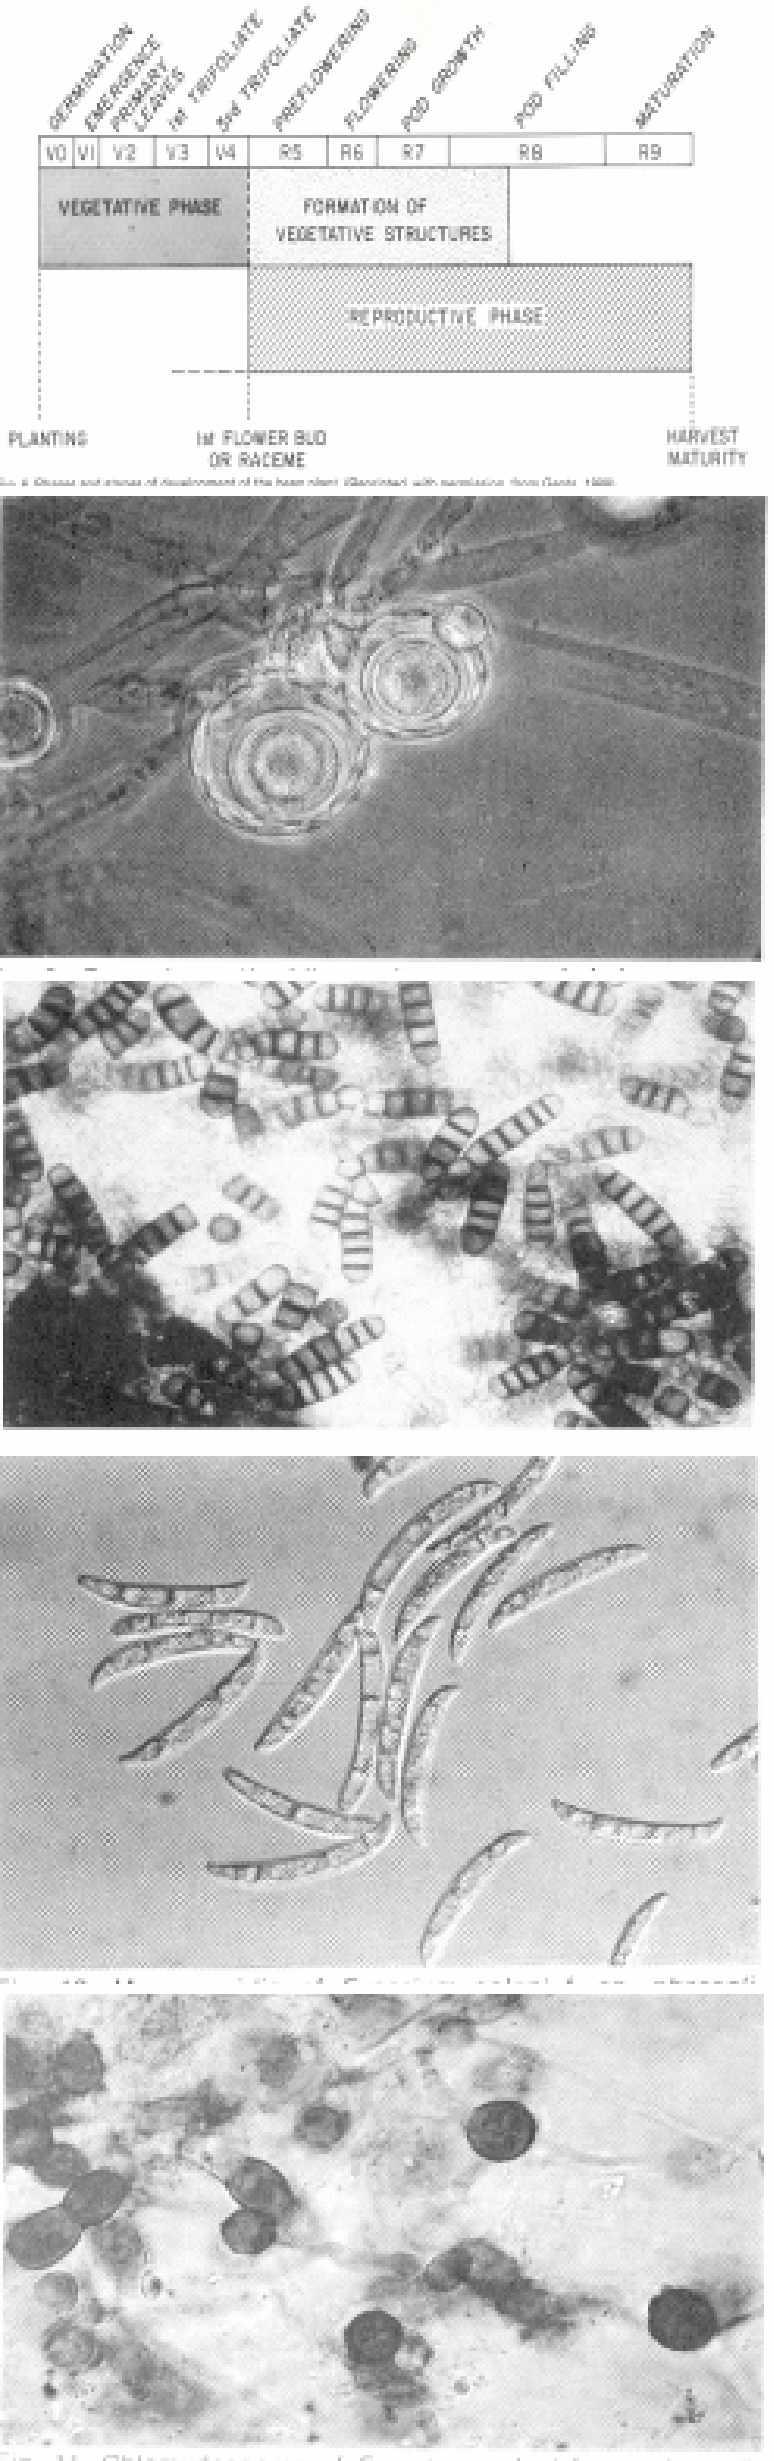 5 Phase and stages of development of the bean plant 6 Oogonia, antheridia and oospores of Aphanomyces euteiches f.